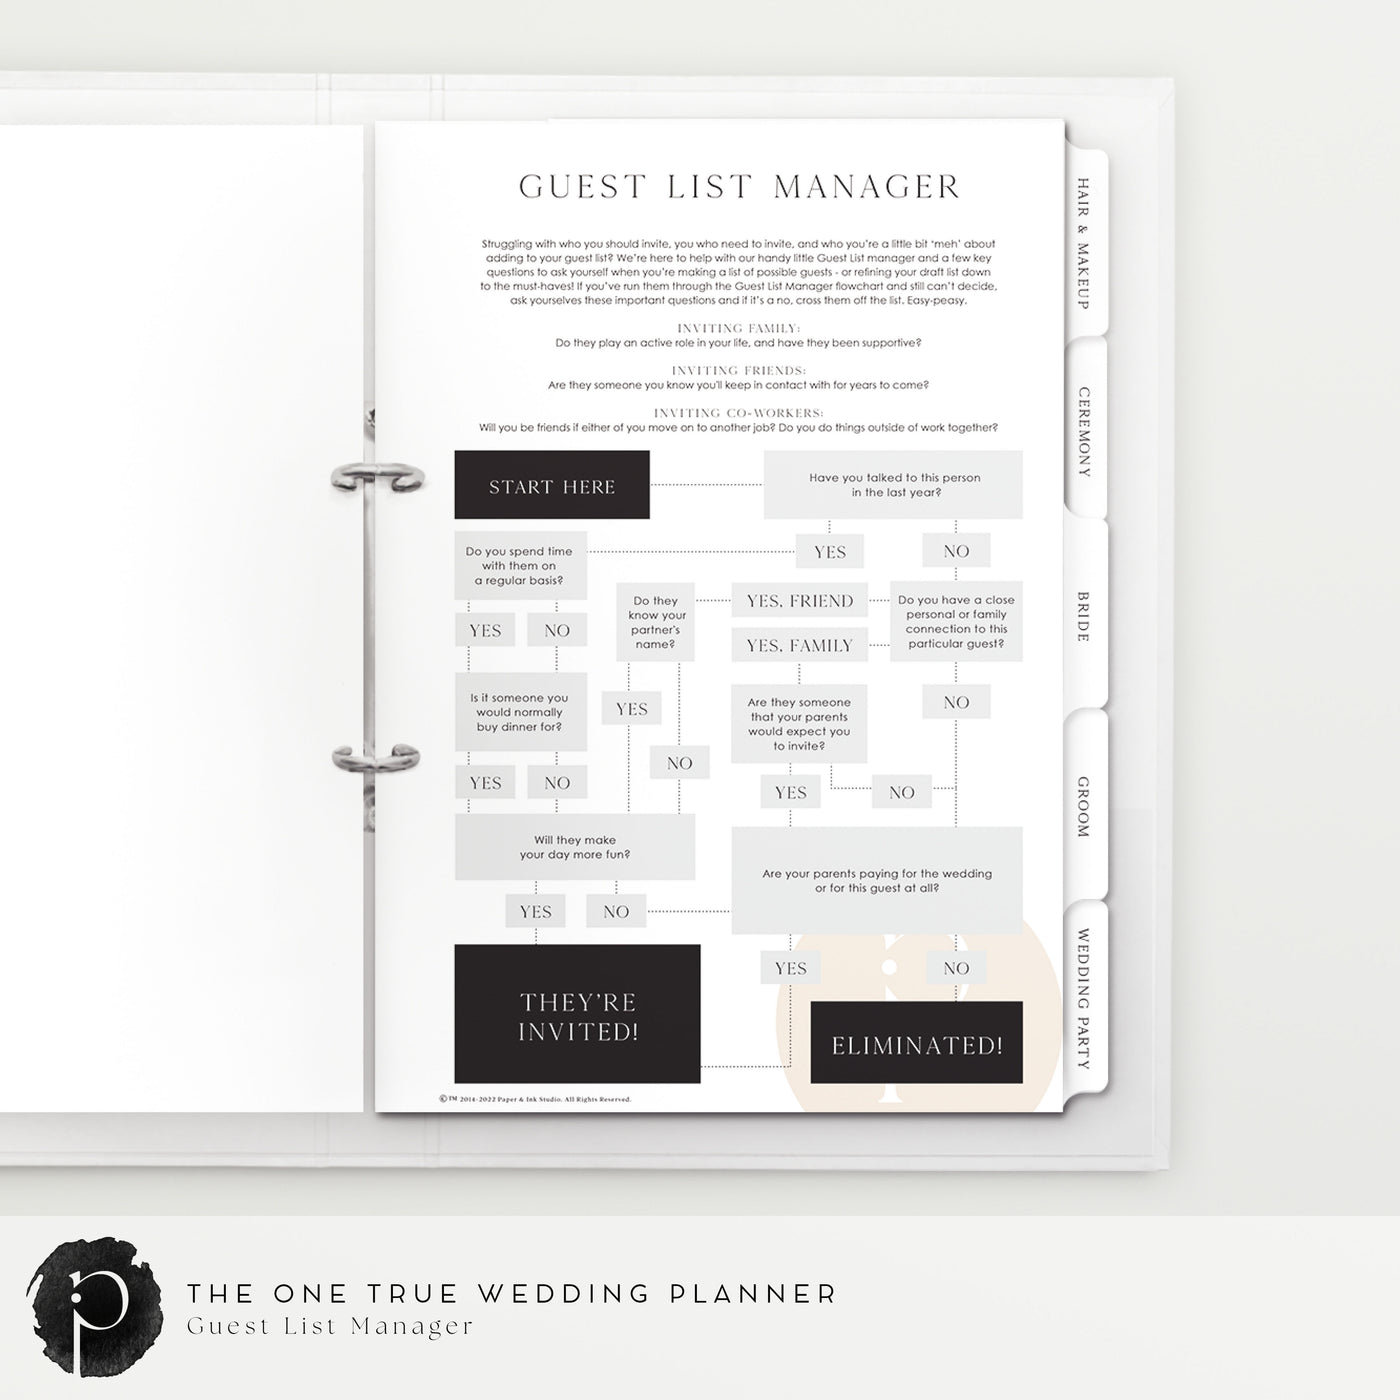 An example image of the guest list manager flow chart information page you can find in the wedding planner and organiser made by Paper and Ink Studio